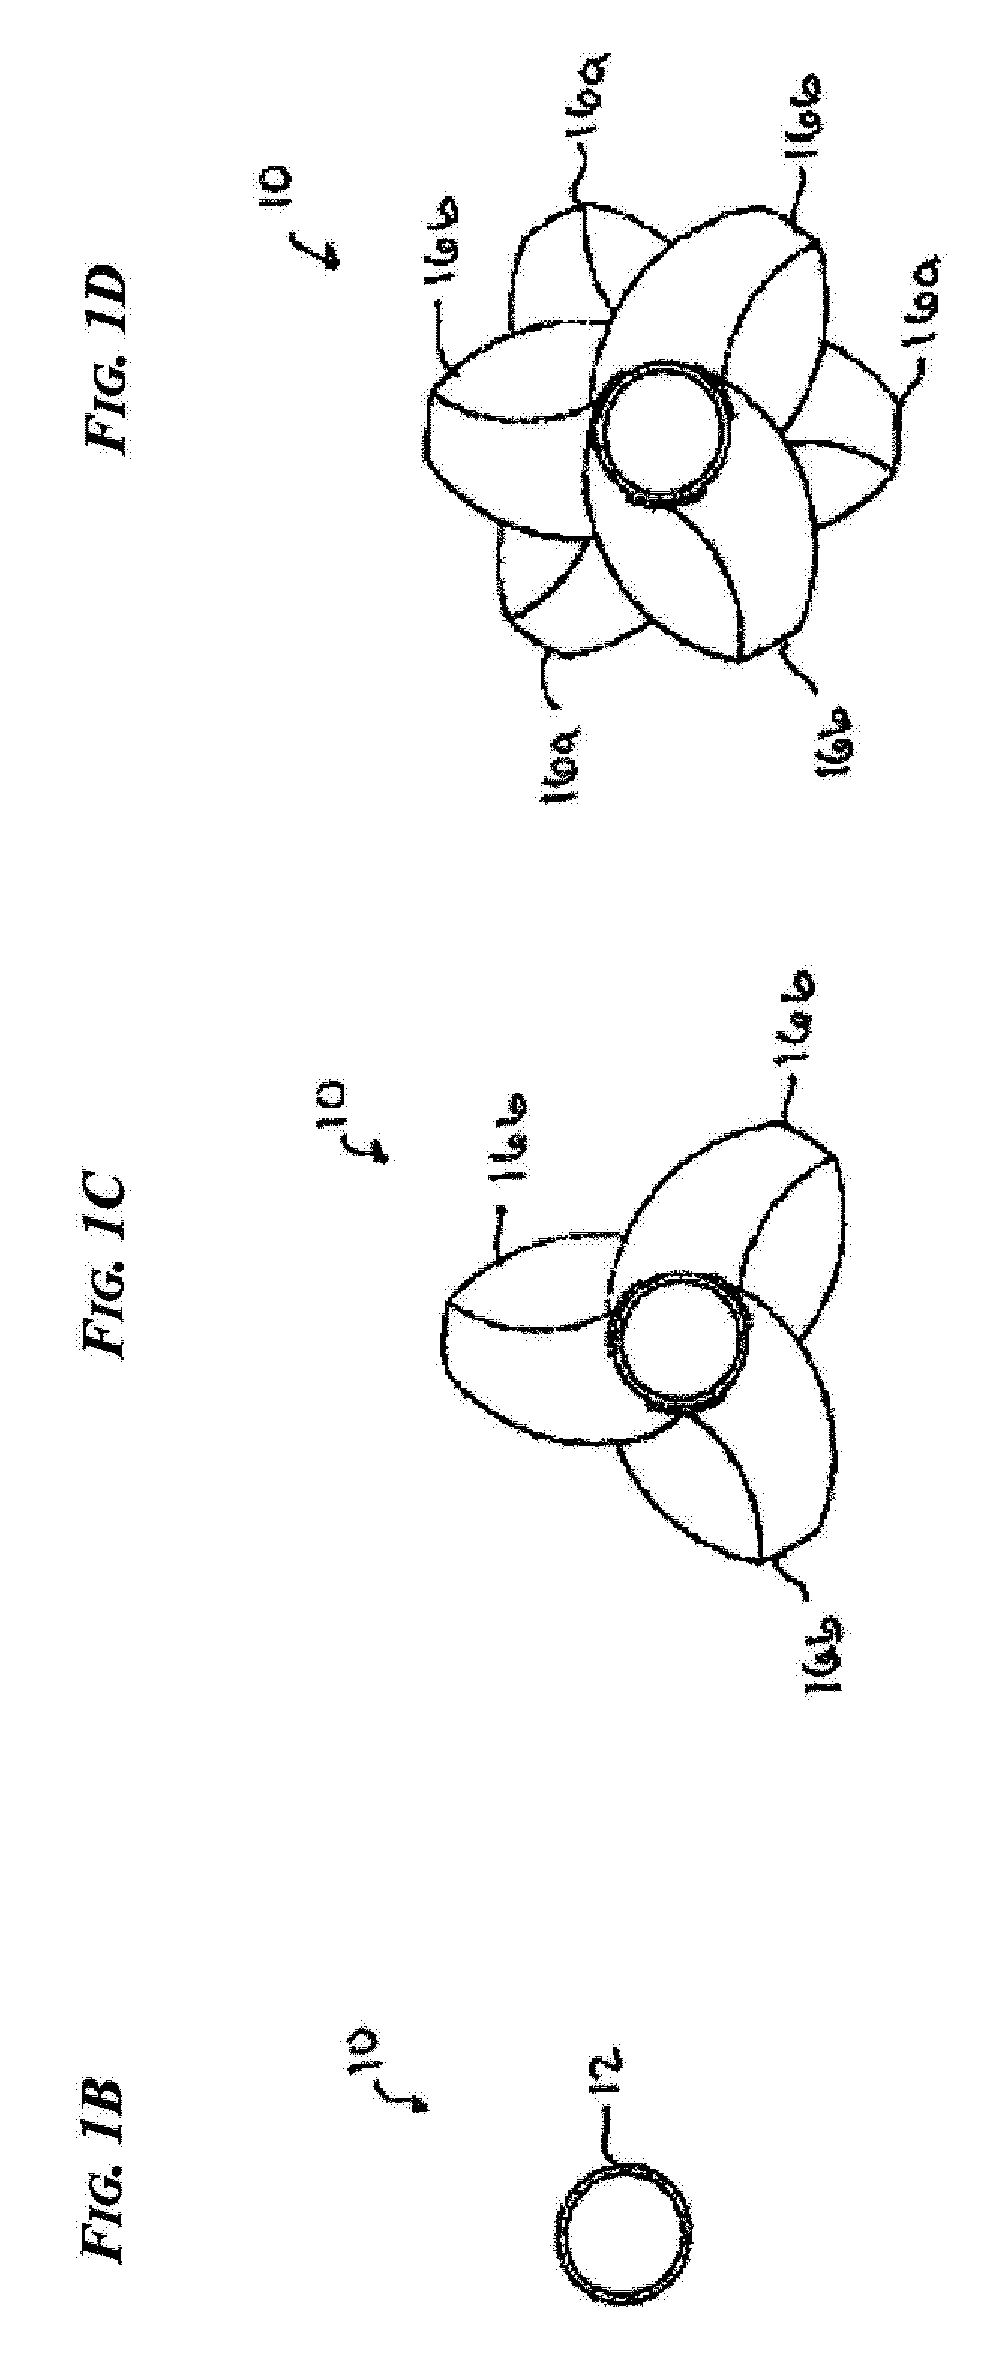 Wound closure devices and methods